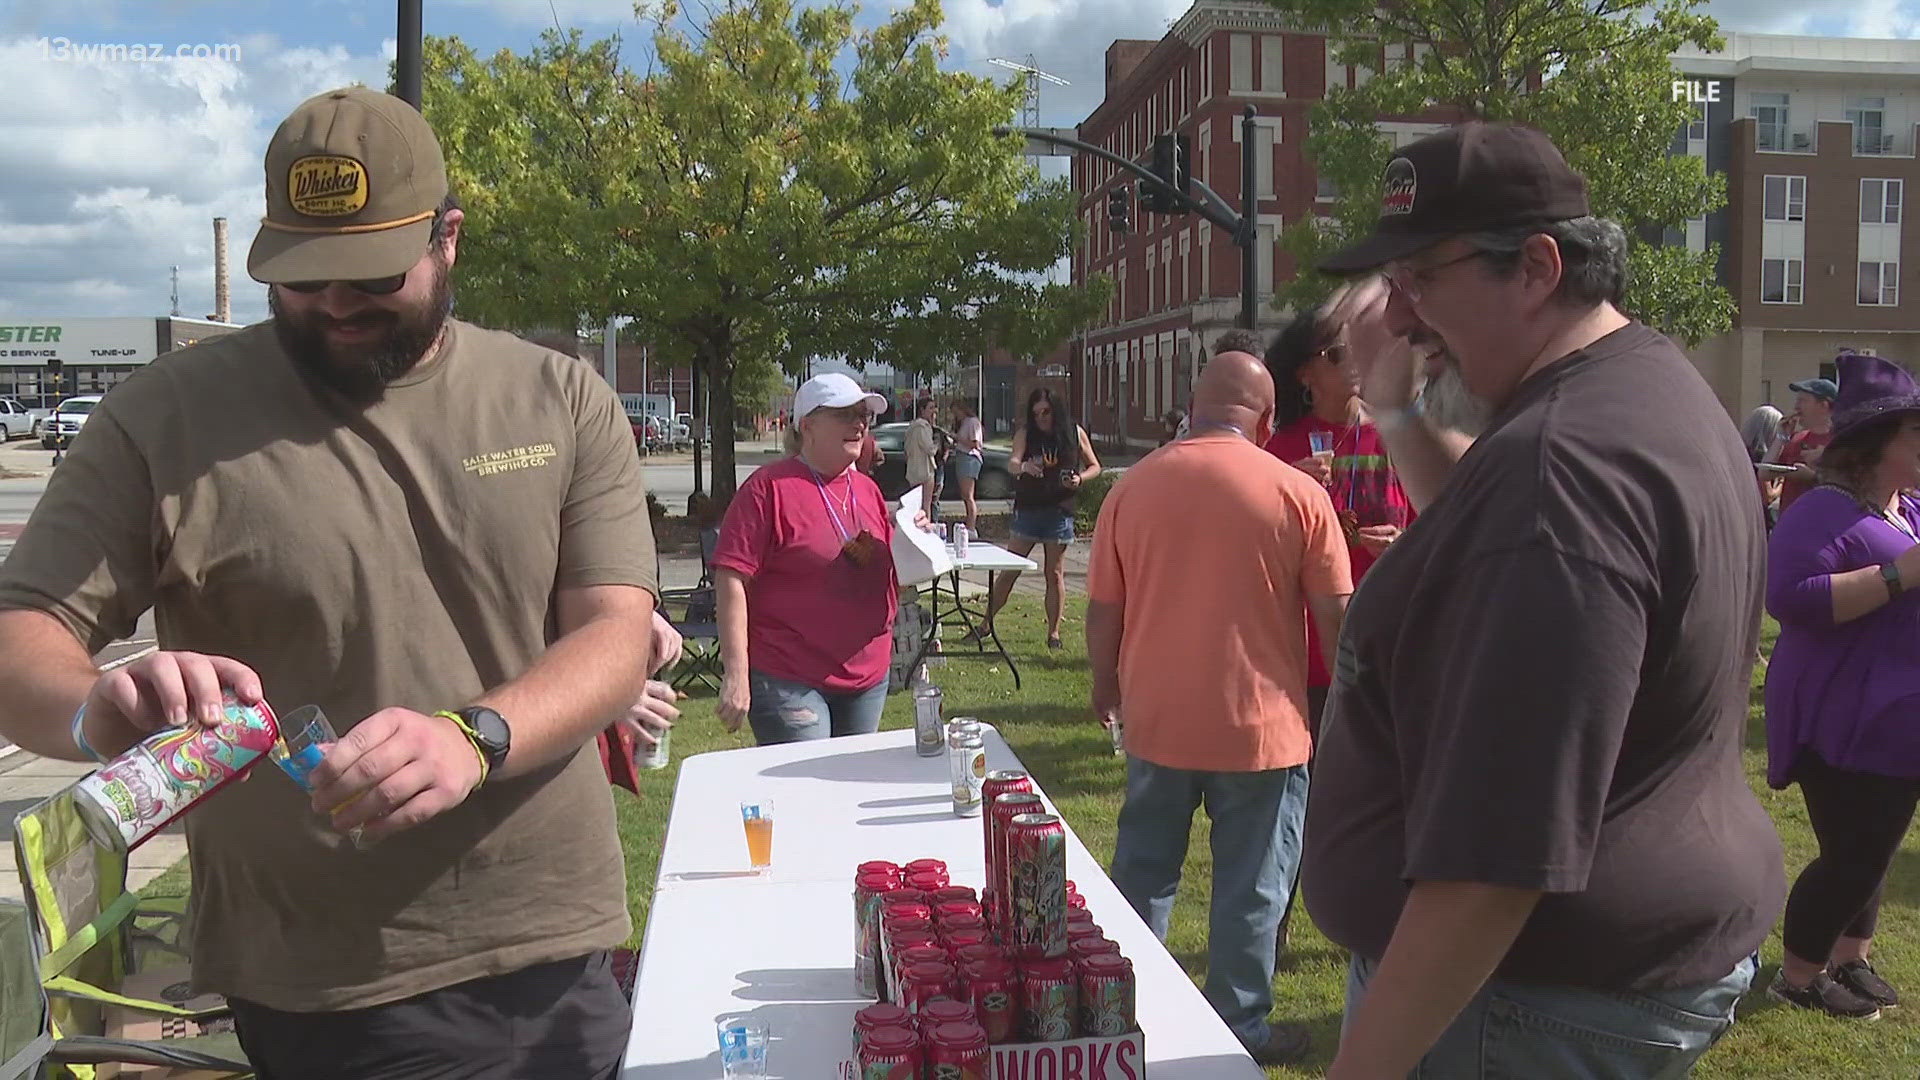 This celebration is the festival's 8th year bringing good beverages and better vibes to downtown Macon.